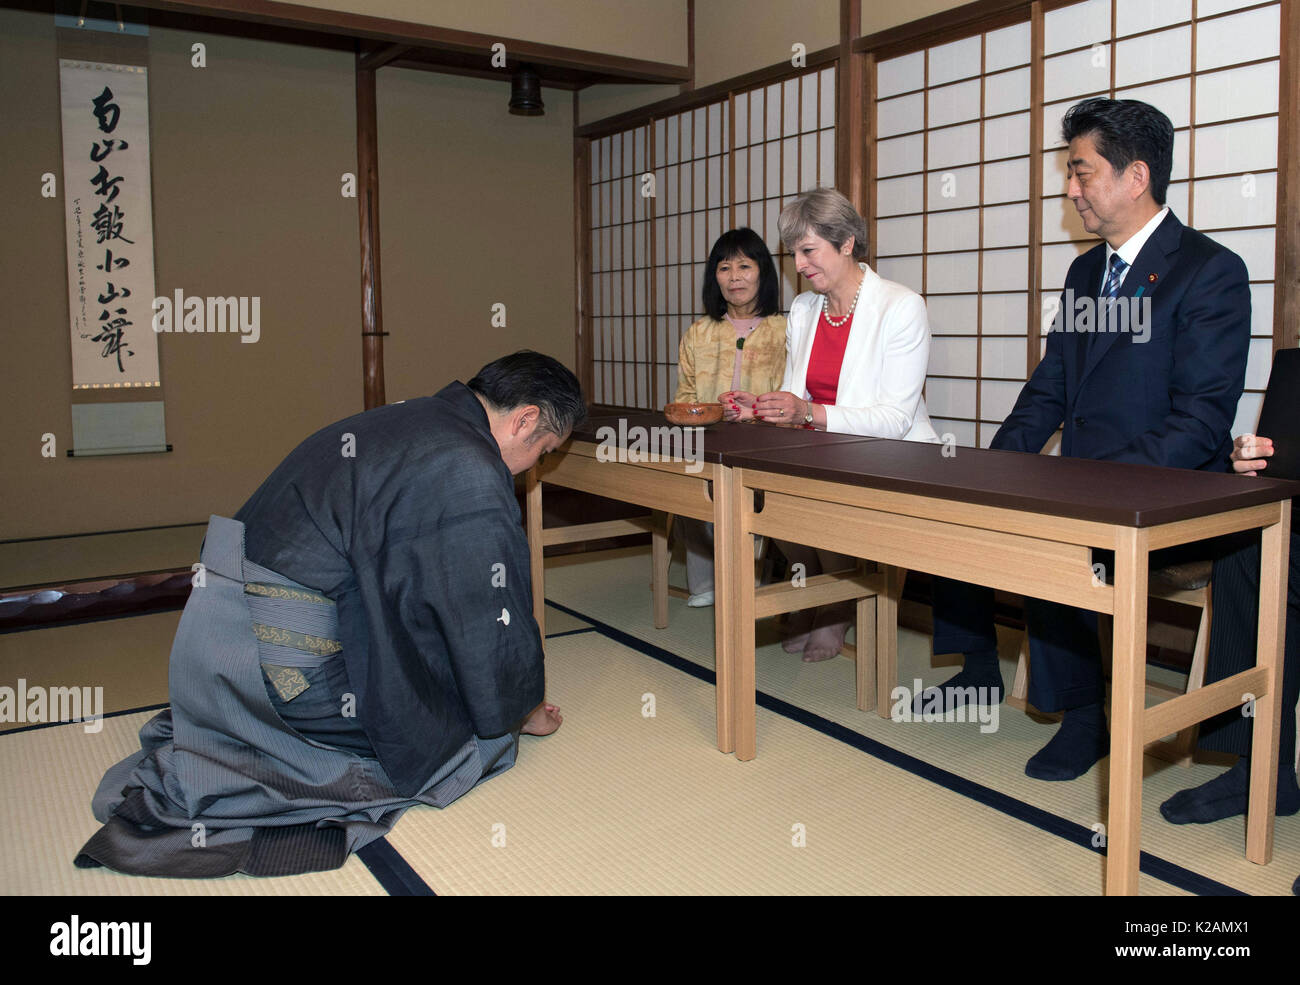 Prime Minister Theresa May takes part in a tea ceremony in Kyoto with Prime Minister of Japan Shinzo Abe (right), during her visit to the country. Stock Photo